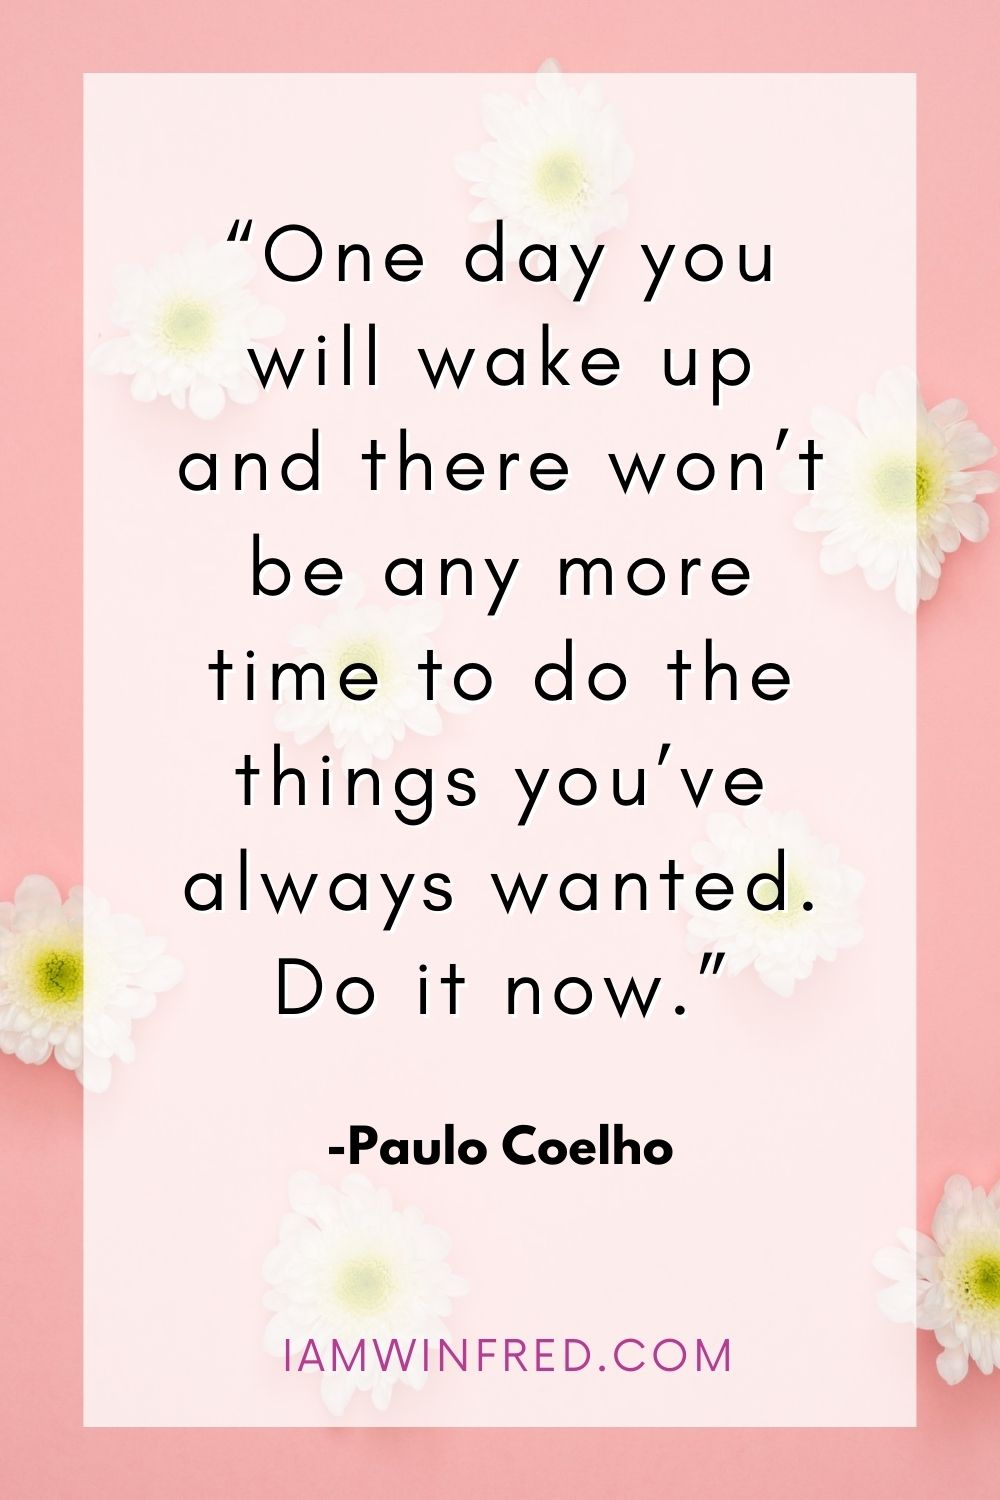 One Day You Will Wake Up And There Wont Be Any More Time To Do The Things Youve Always Wanted. Do It Now.